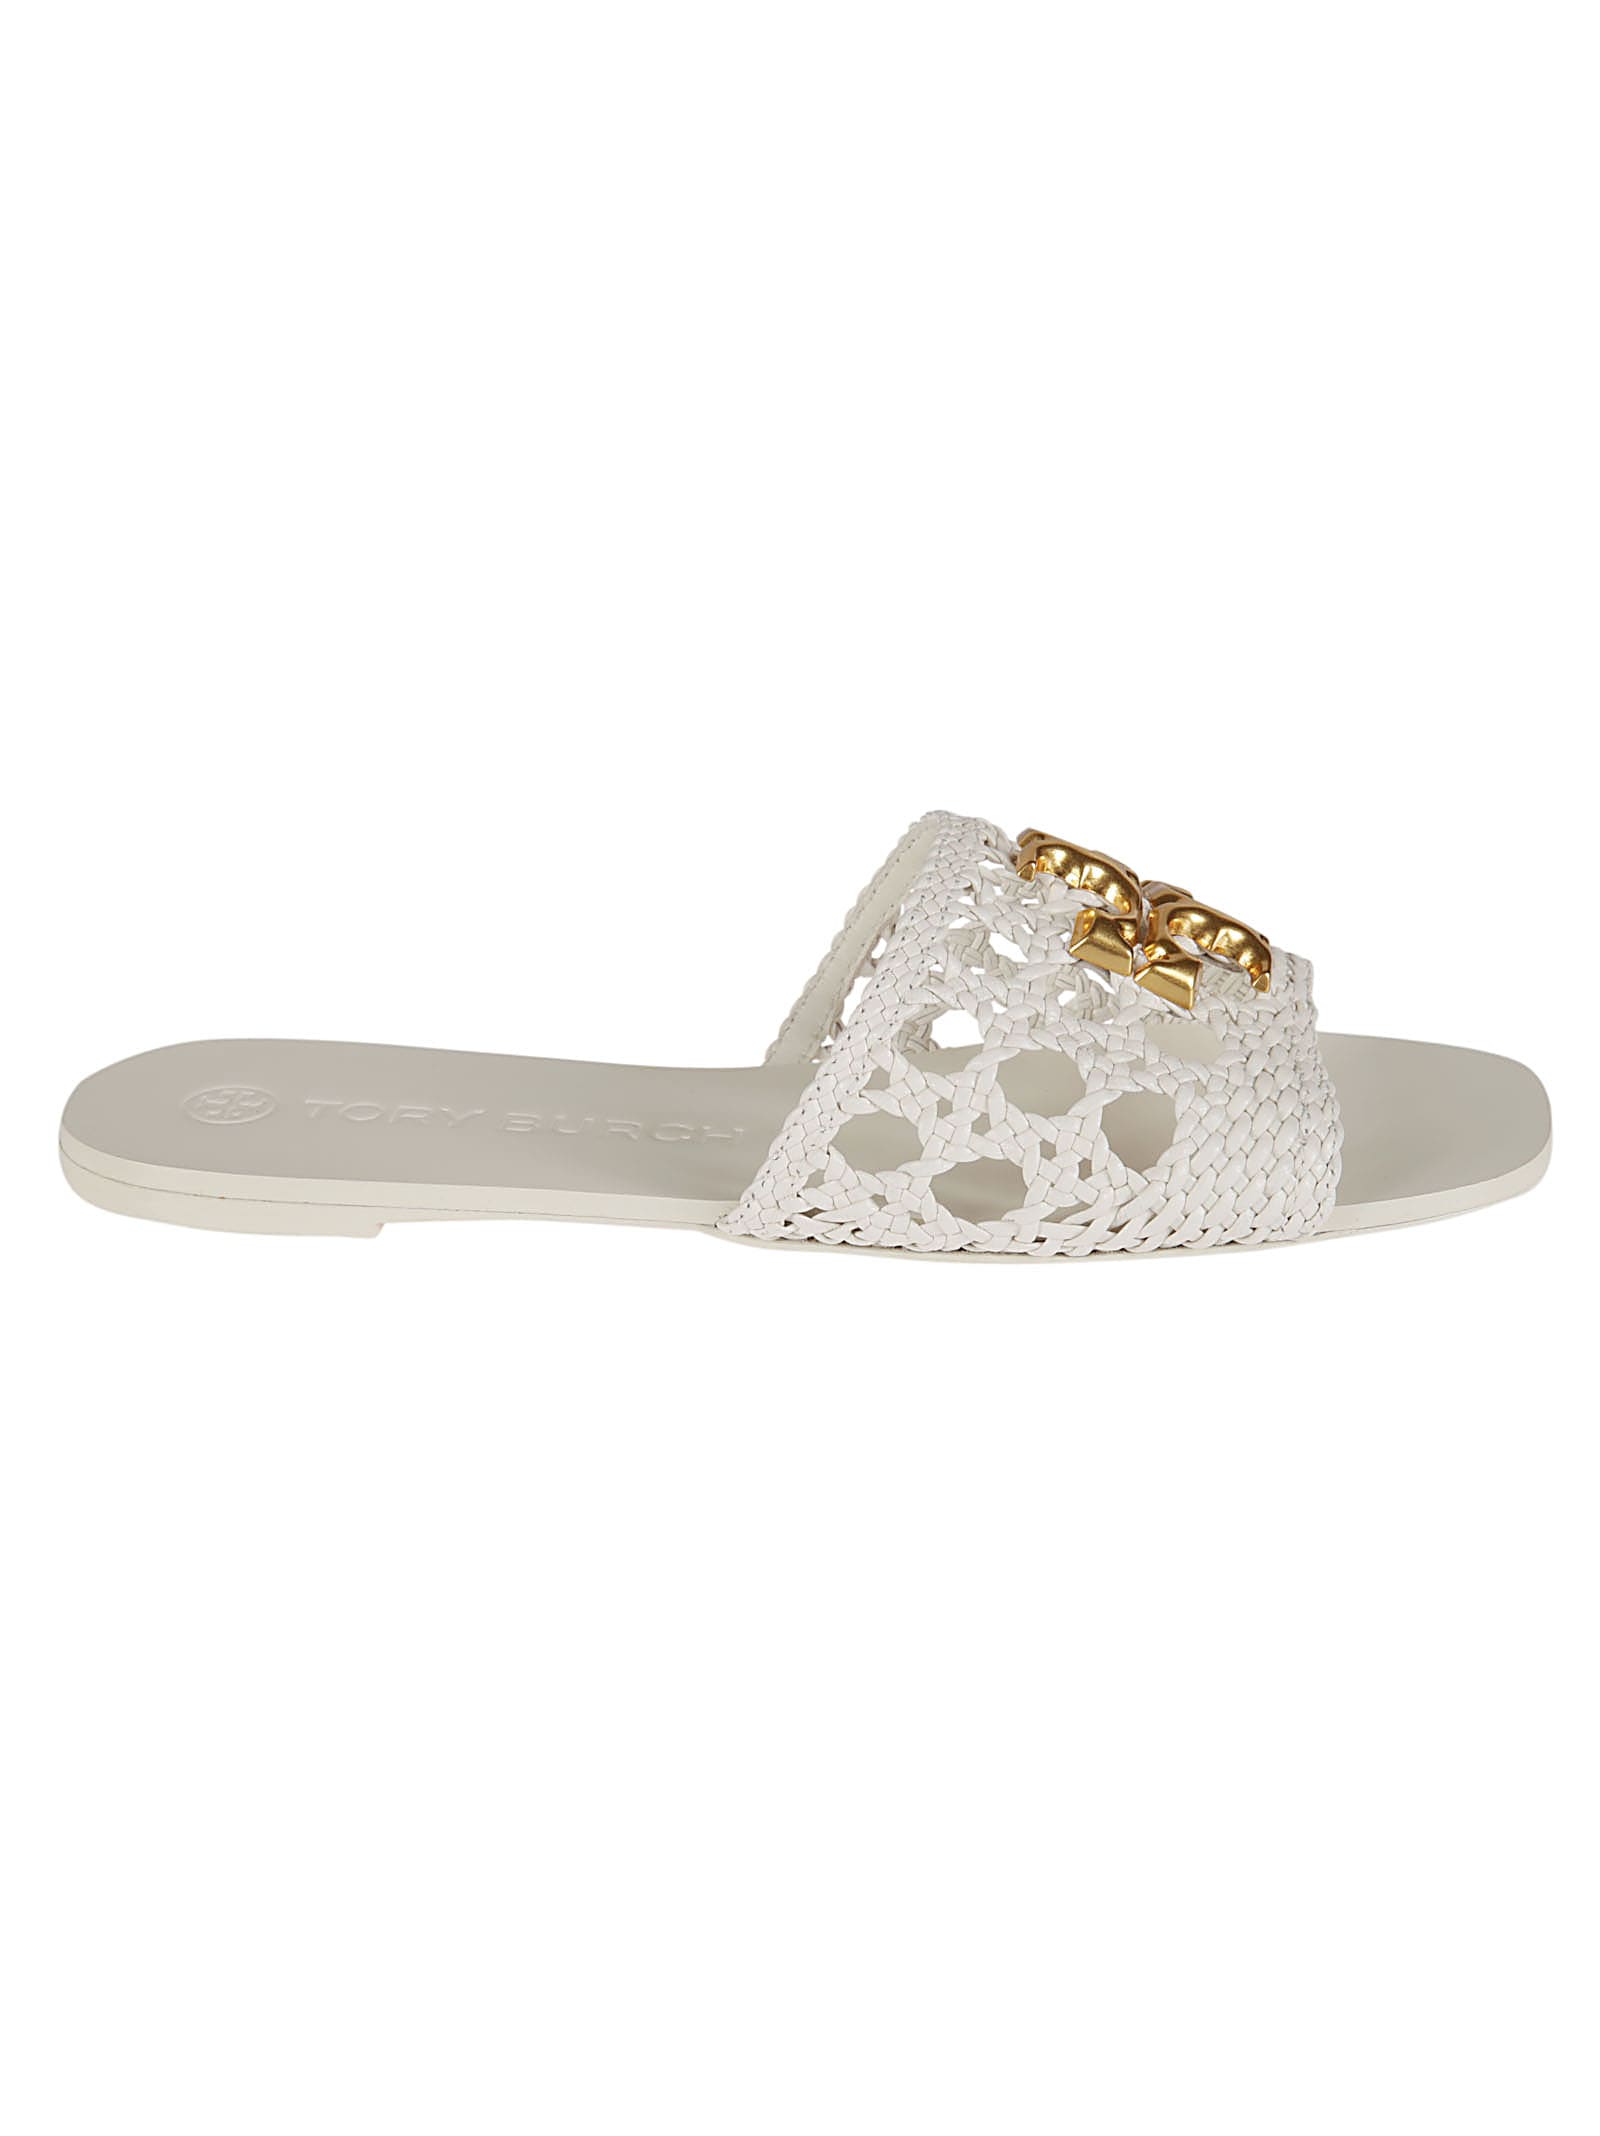 Buy Tory Burch Eleanor Woven Flat Sliders online, shop Tory Burch shoes with free shipping